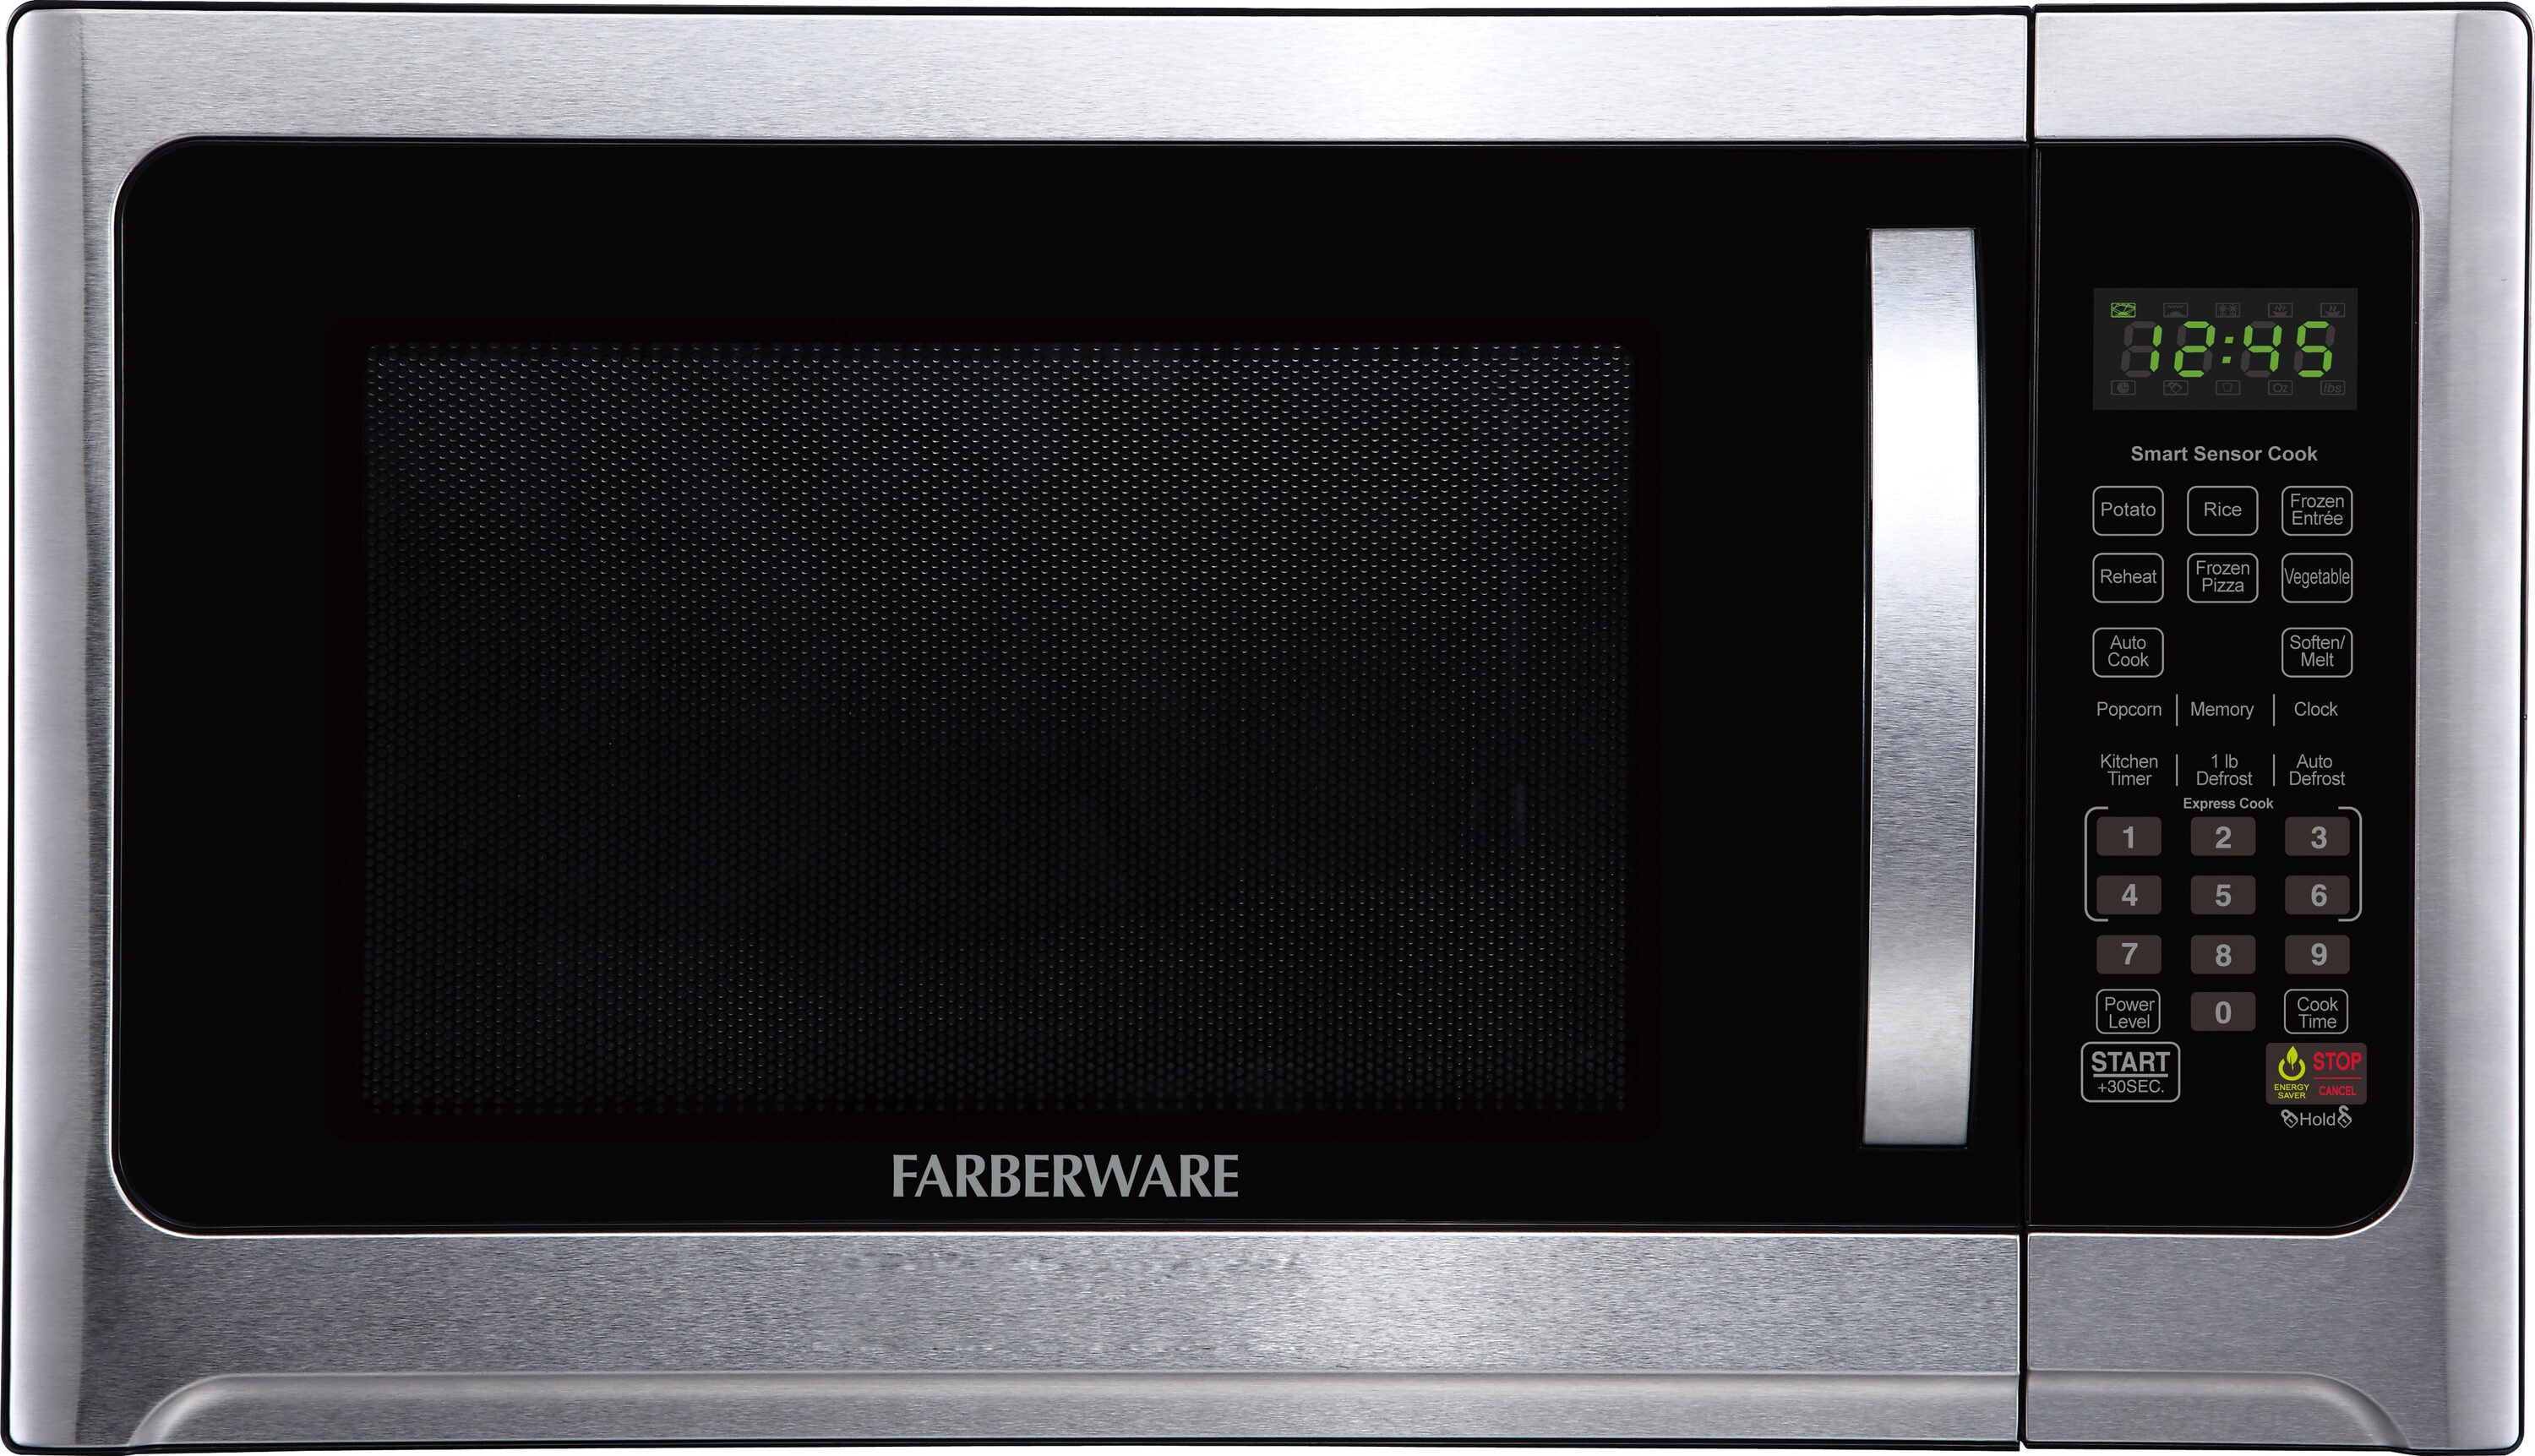  Farberware Countertop Microwave 1100 Watts, 1.2 cu ft - Smart  Sensor Microwave Oven With LED Lighting and Child Lock - Perfect for  Apartments and Dorms - Easy Clean Black Interior, Stainless